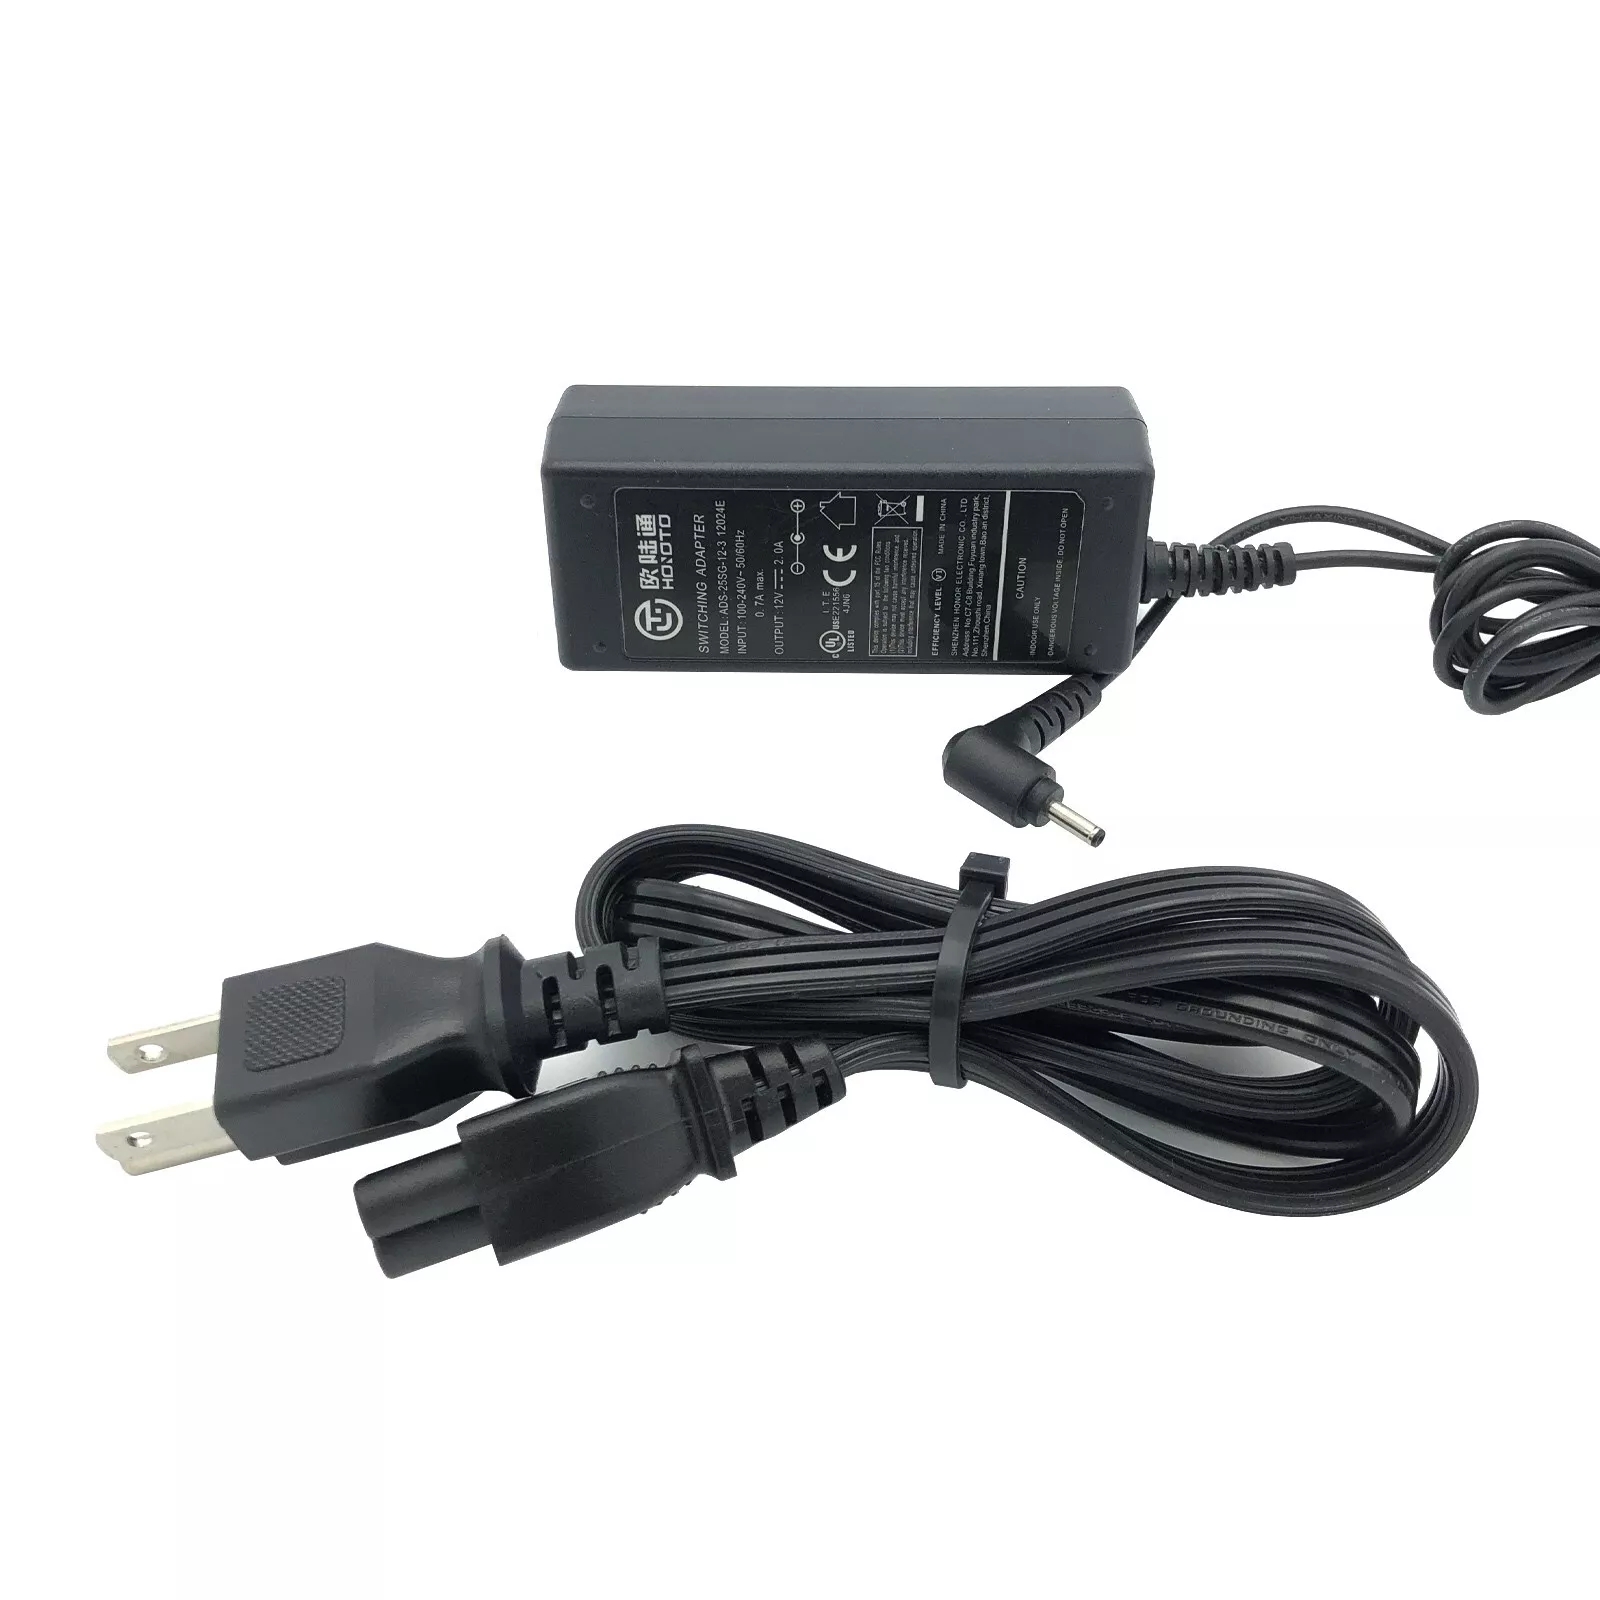 *Brand NEW*Original Hoioto 12V 2A Switching Adapter ADS-25SG-12-3 Power Supply